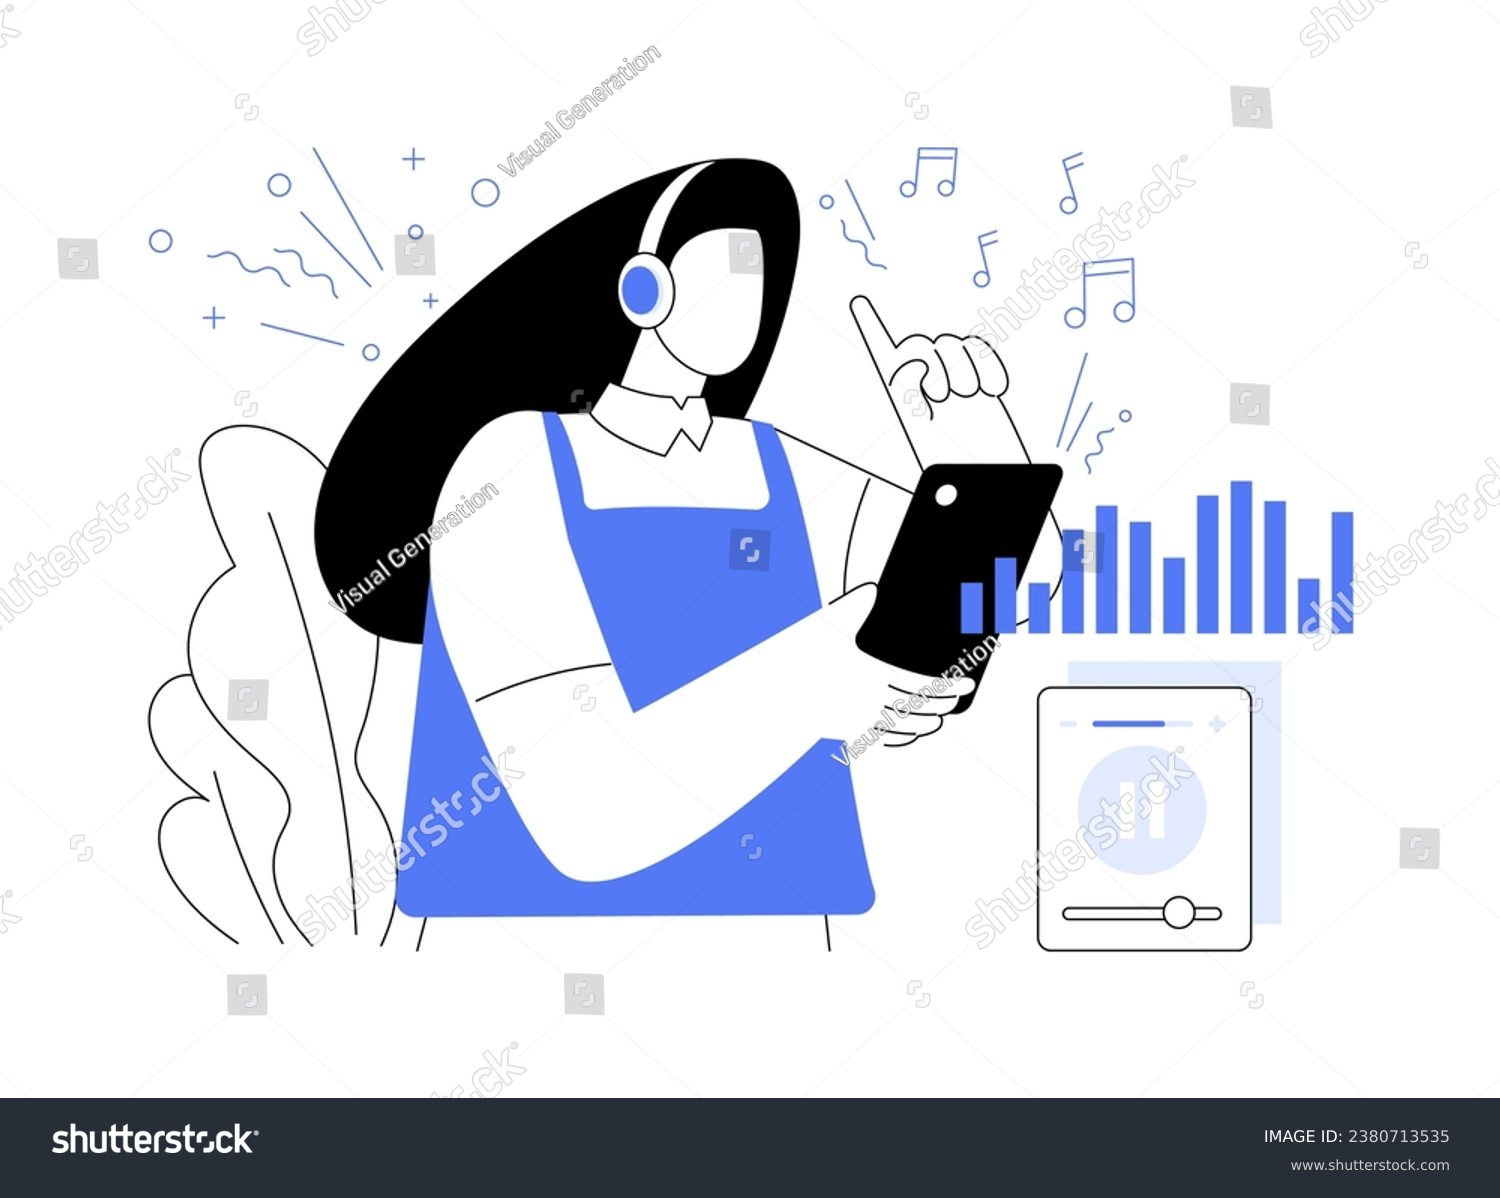 SVG of Music apps abstract concept vector illustration. Attractive girl in headphones listening to music with smartphone, IT technology, application development, create playlist abstract metaphor. svg